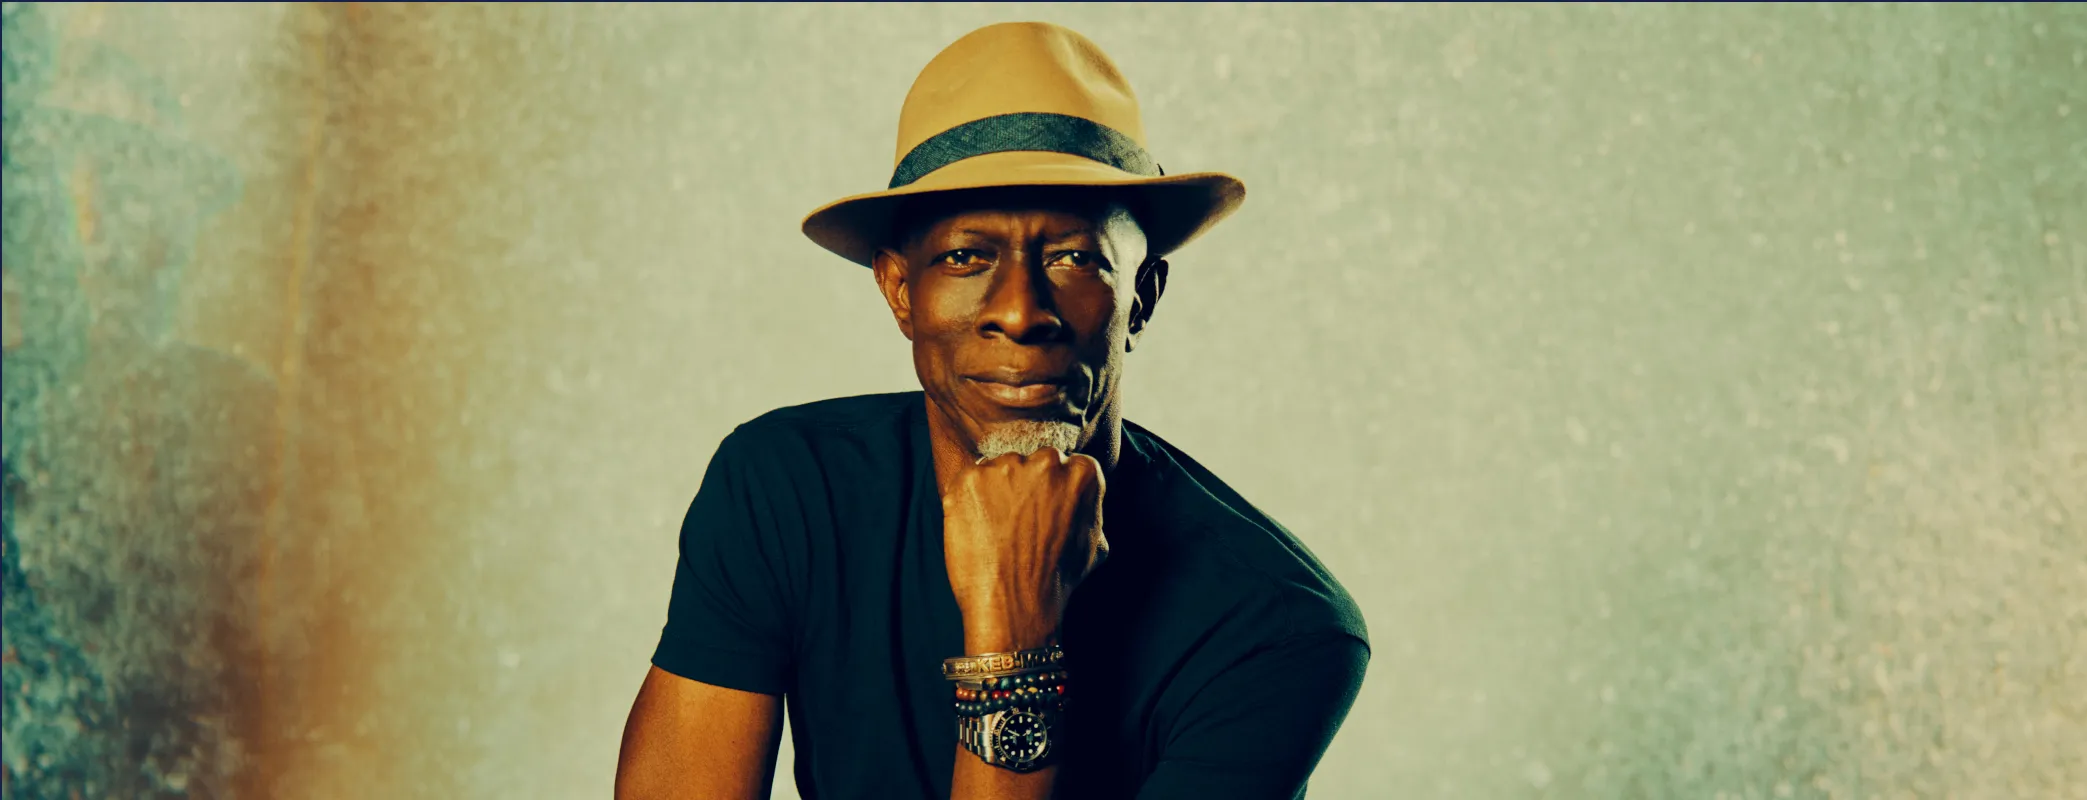 Five Songs You Didn’t Know Keb’ Mo’ Covered